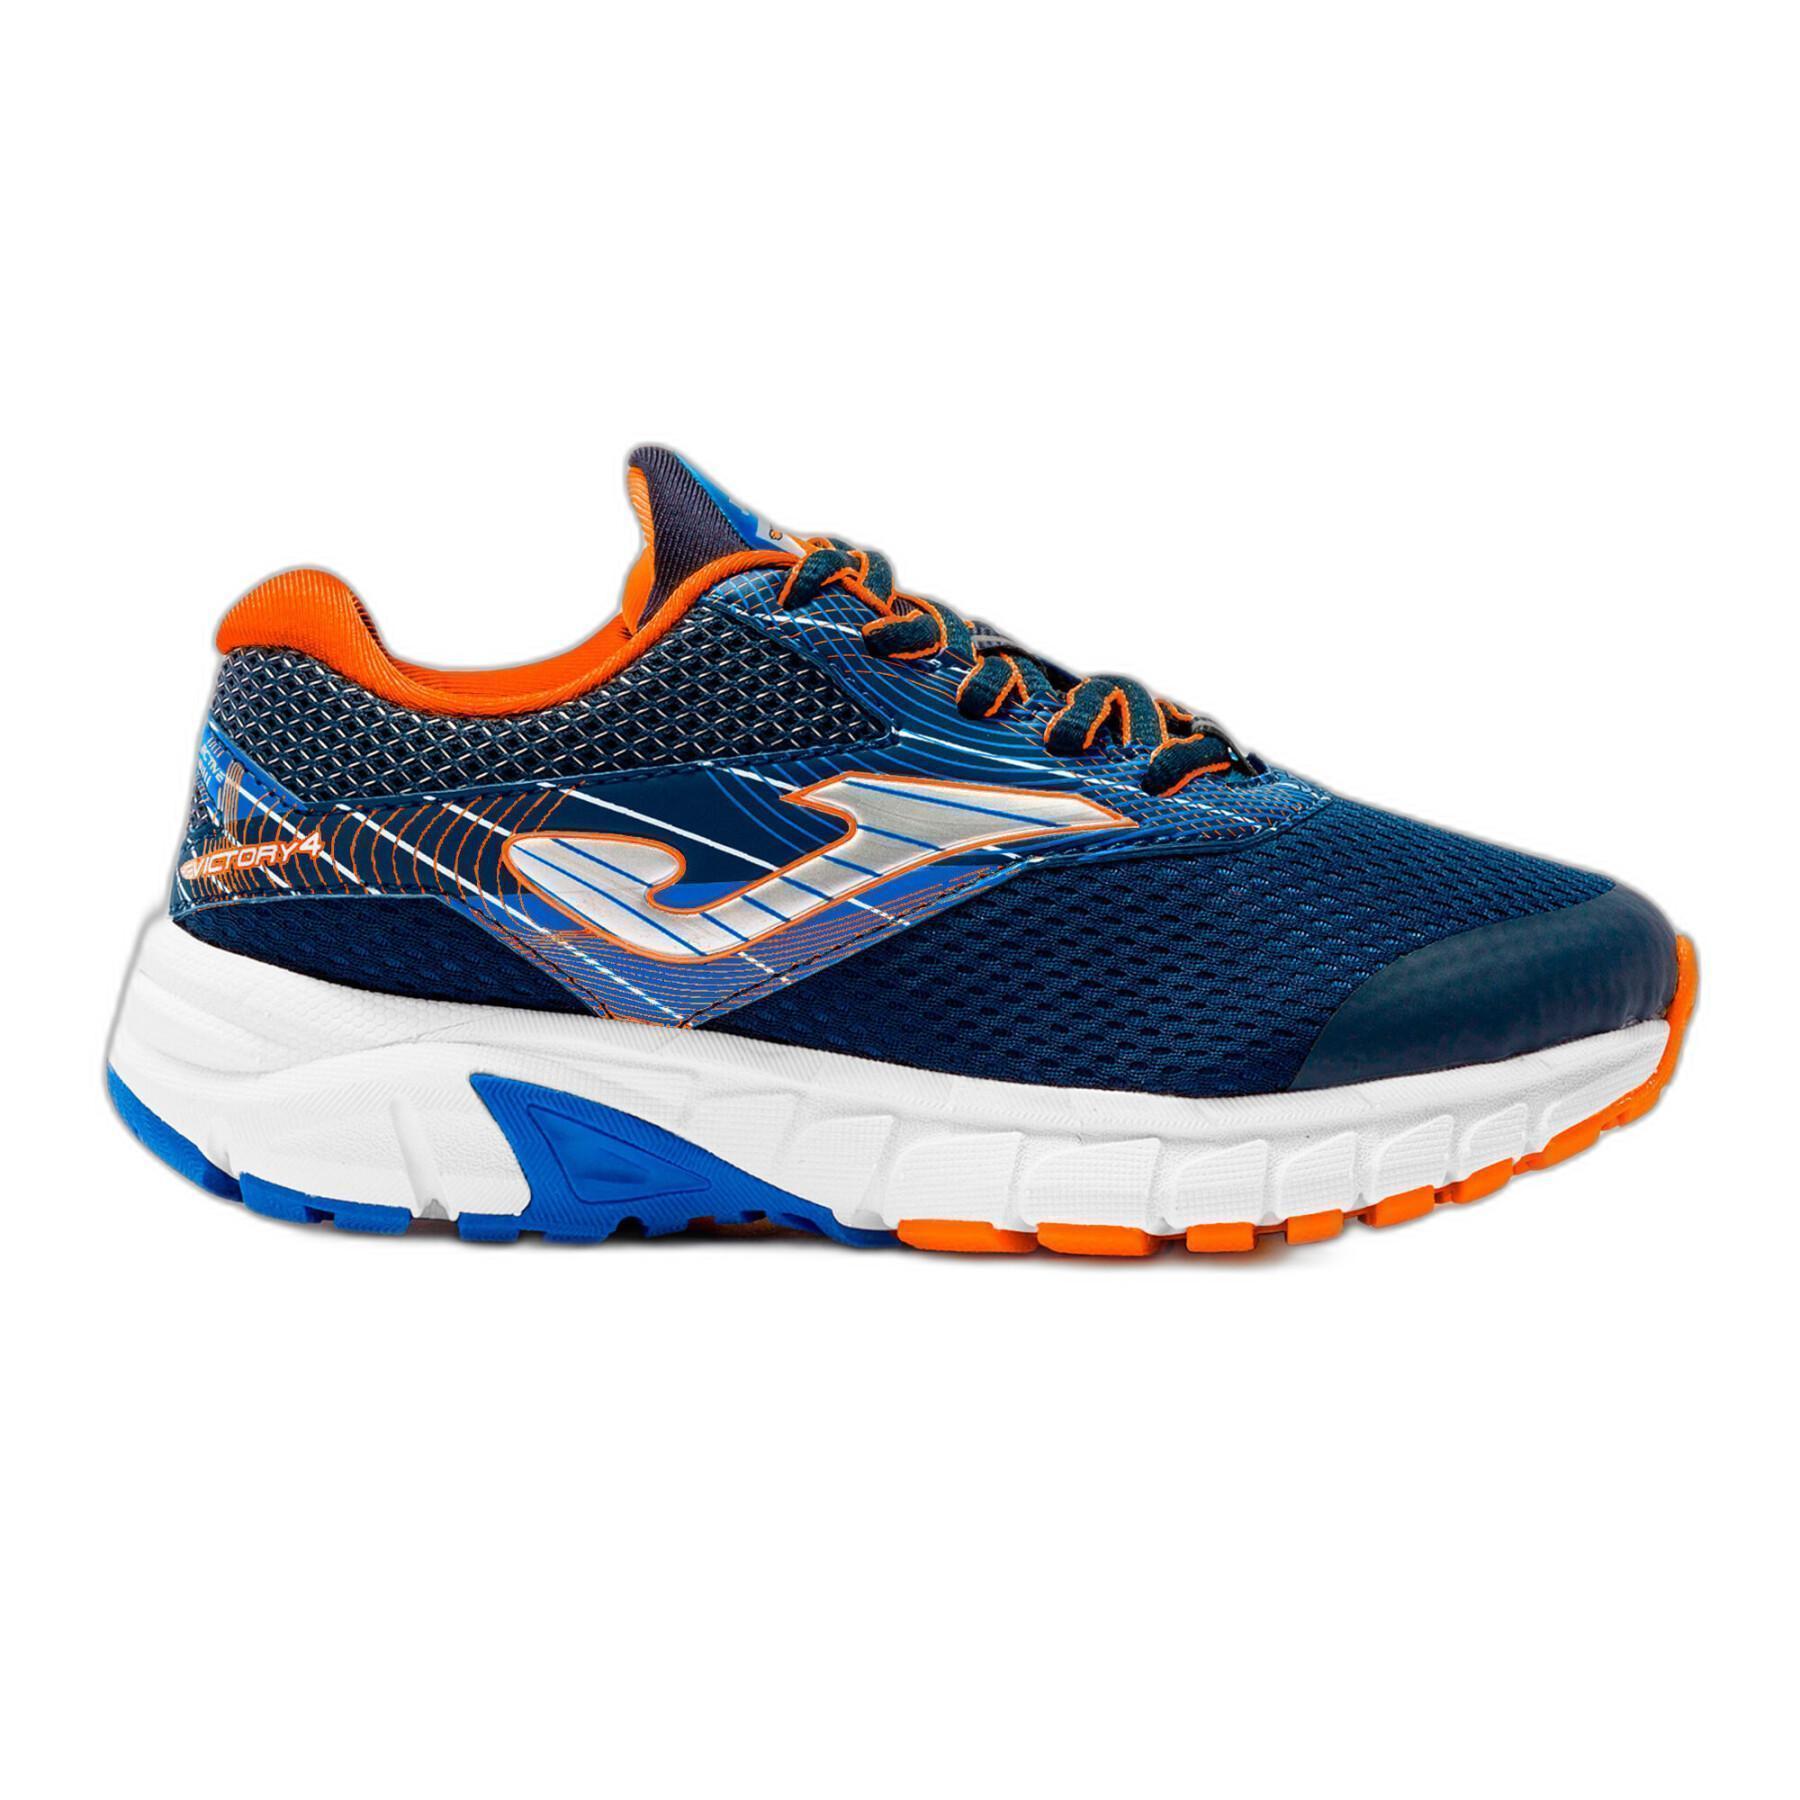 Chaussures de running enfant Joma Victory